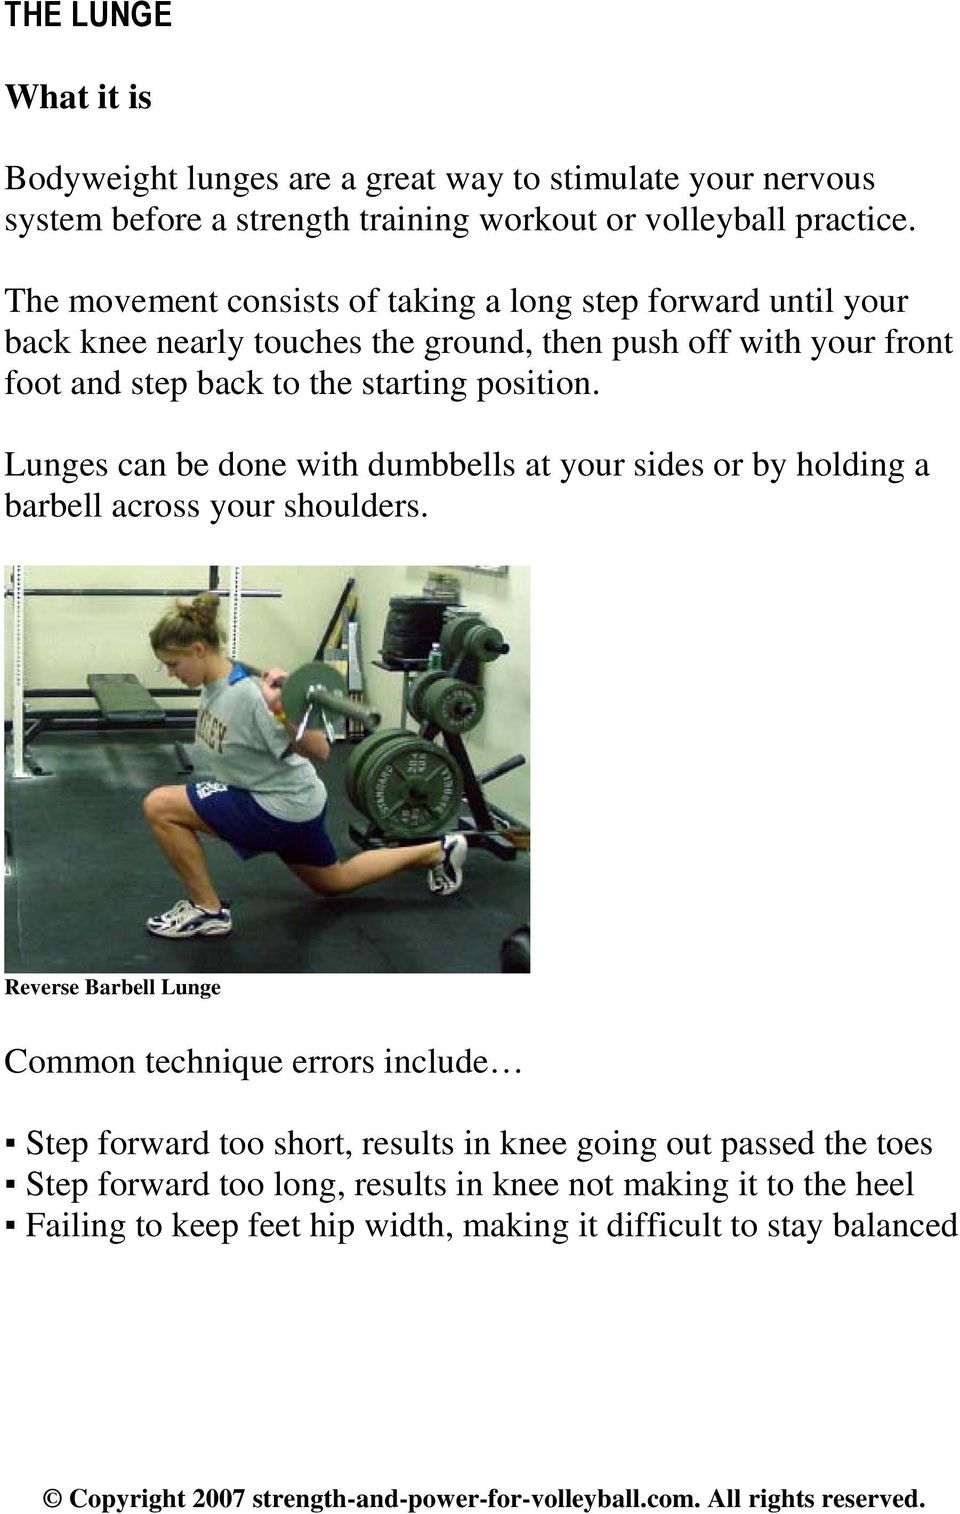 position. Lunges can be done with dumbbells at your sides or by holding a barbell across your shoulders.